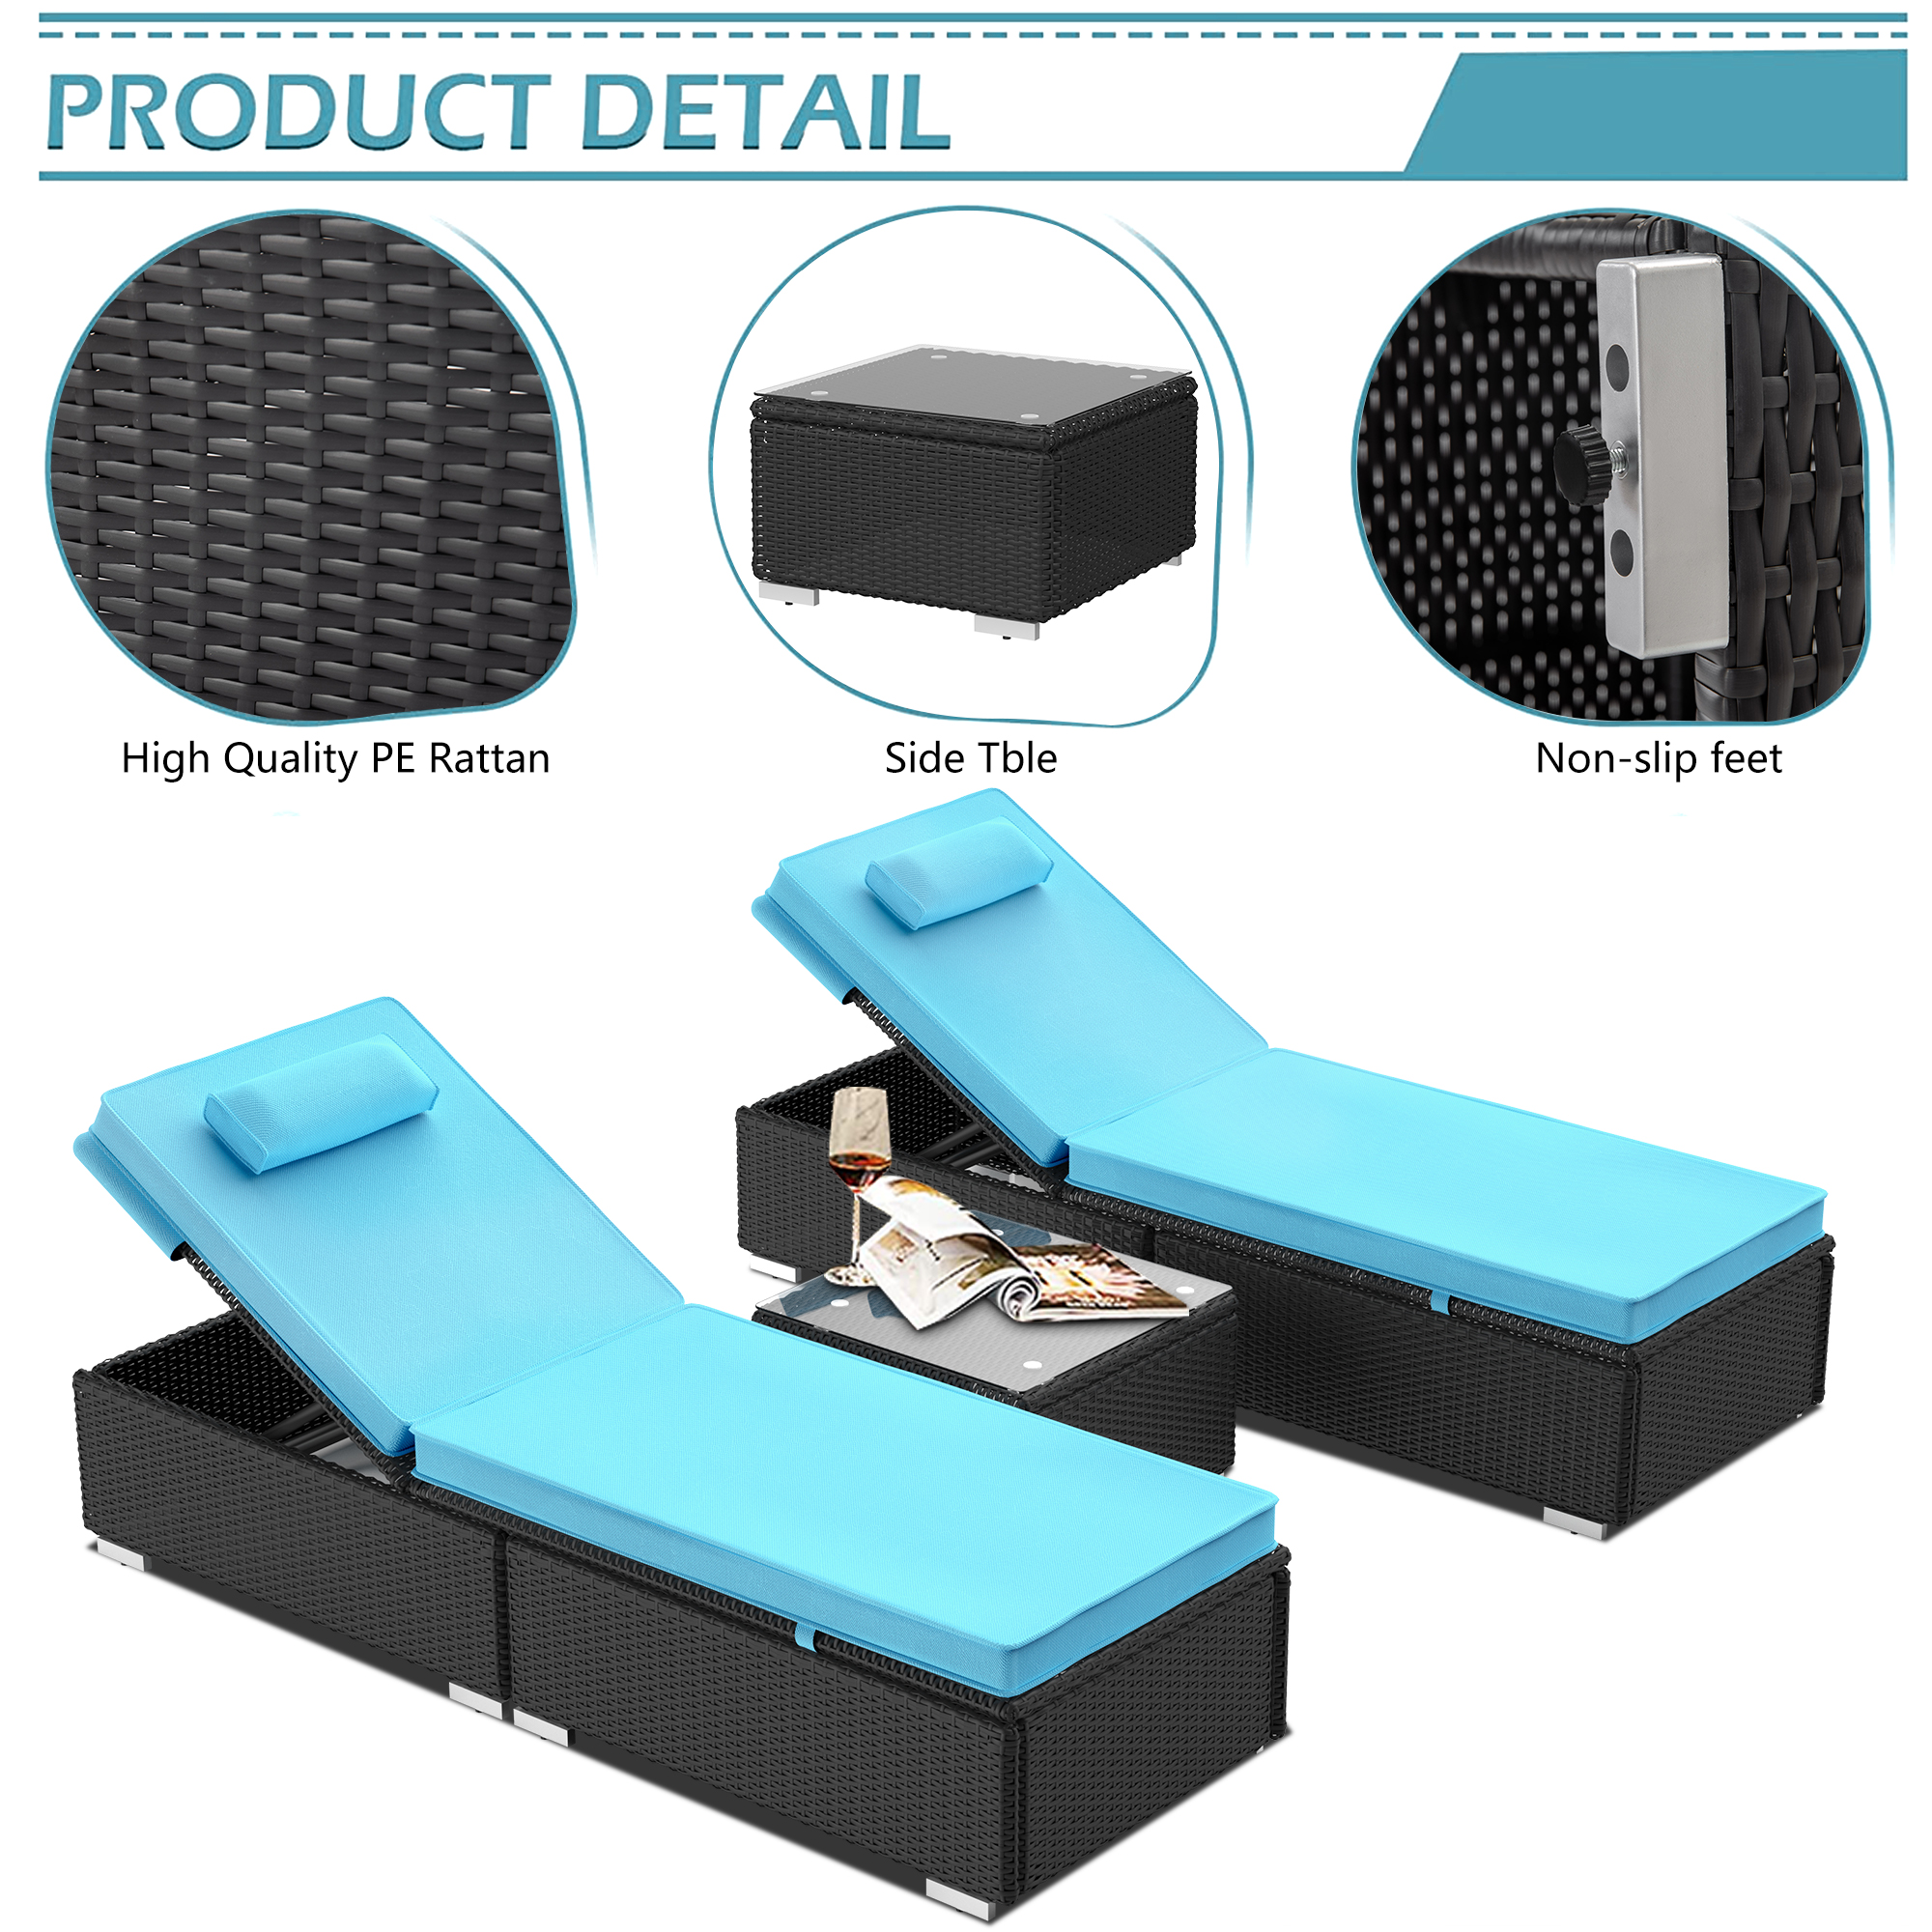 SESSLIFE 2 PCS Lounge Chair for Outside, Adjustable 5 Position Rattan Wicker Outdoor Chaise Lounge with Head Pillow & Thickened Cushion for Poolside, Patio, Garden, Deck (2, Light Blue) - image 5 of 8